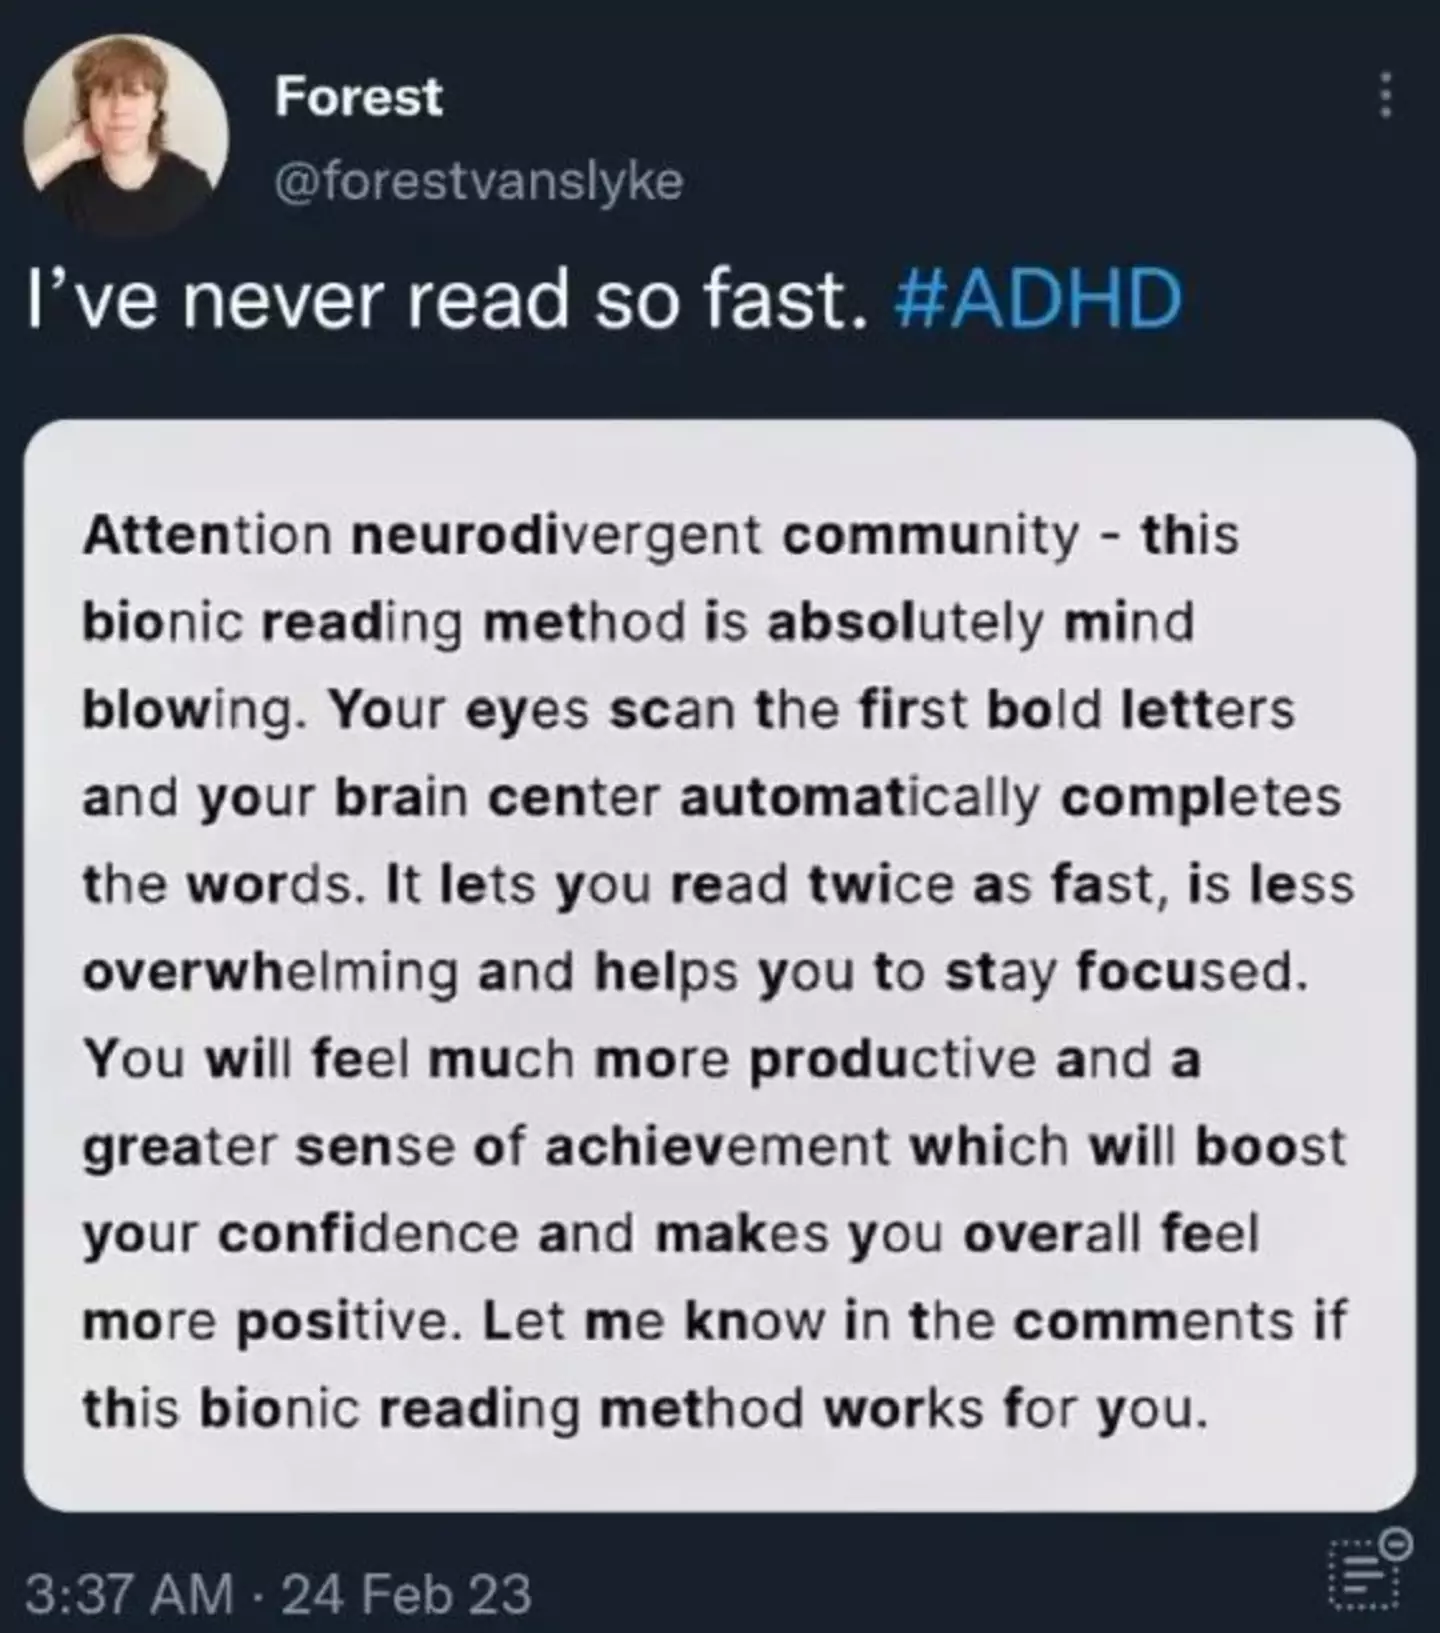 A new reading hack is being praised by neurodivergent people.